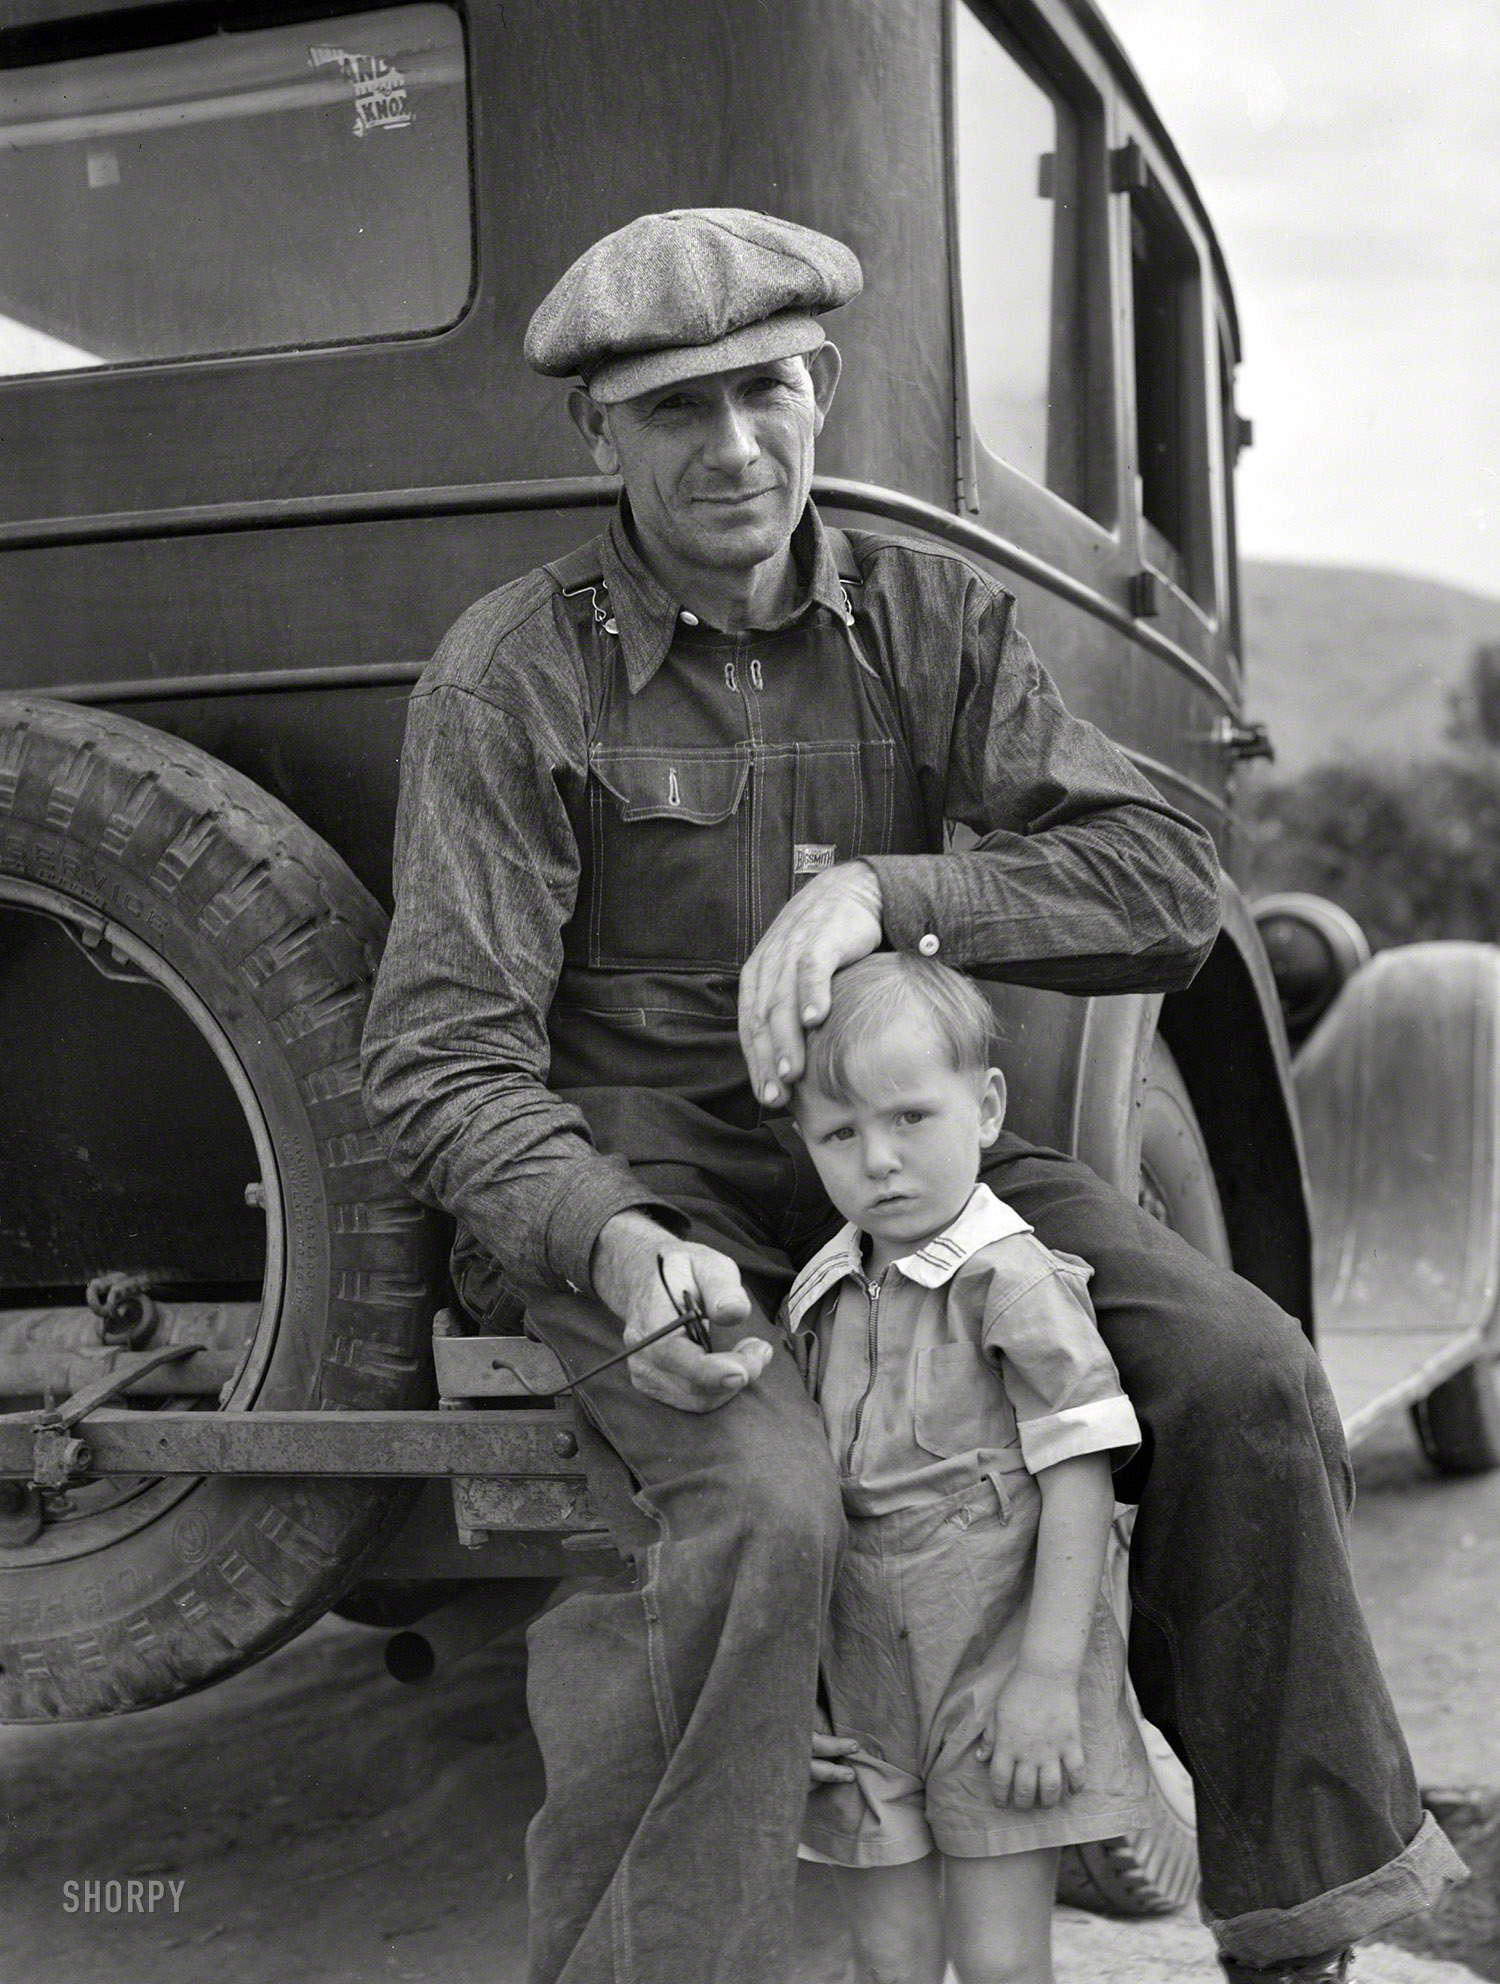 November 1936. "Drought refugee from Polk, Missouri. Awaiting the opening of orange picking season at Porterville, California." Photo by Dorothea Lange for the Resettlement Administration. View full size.